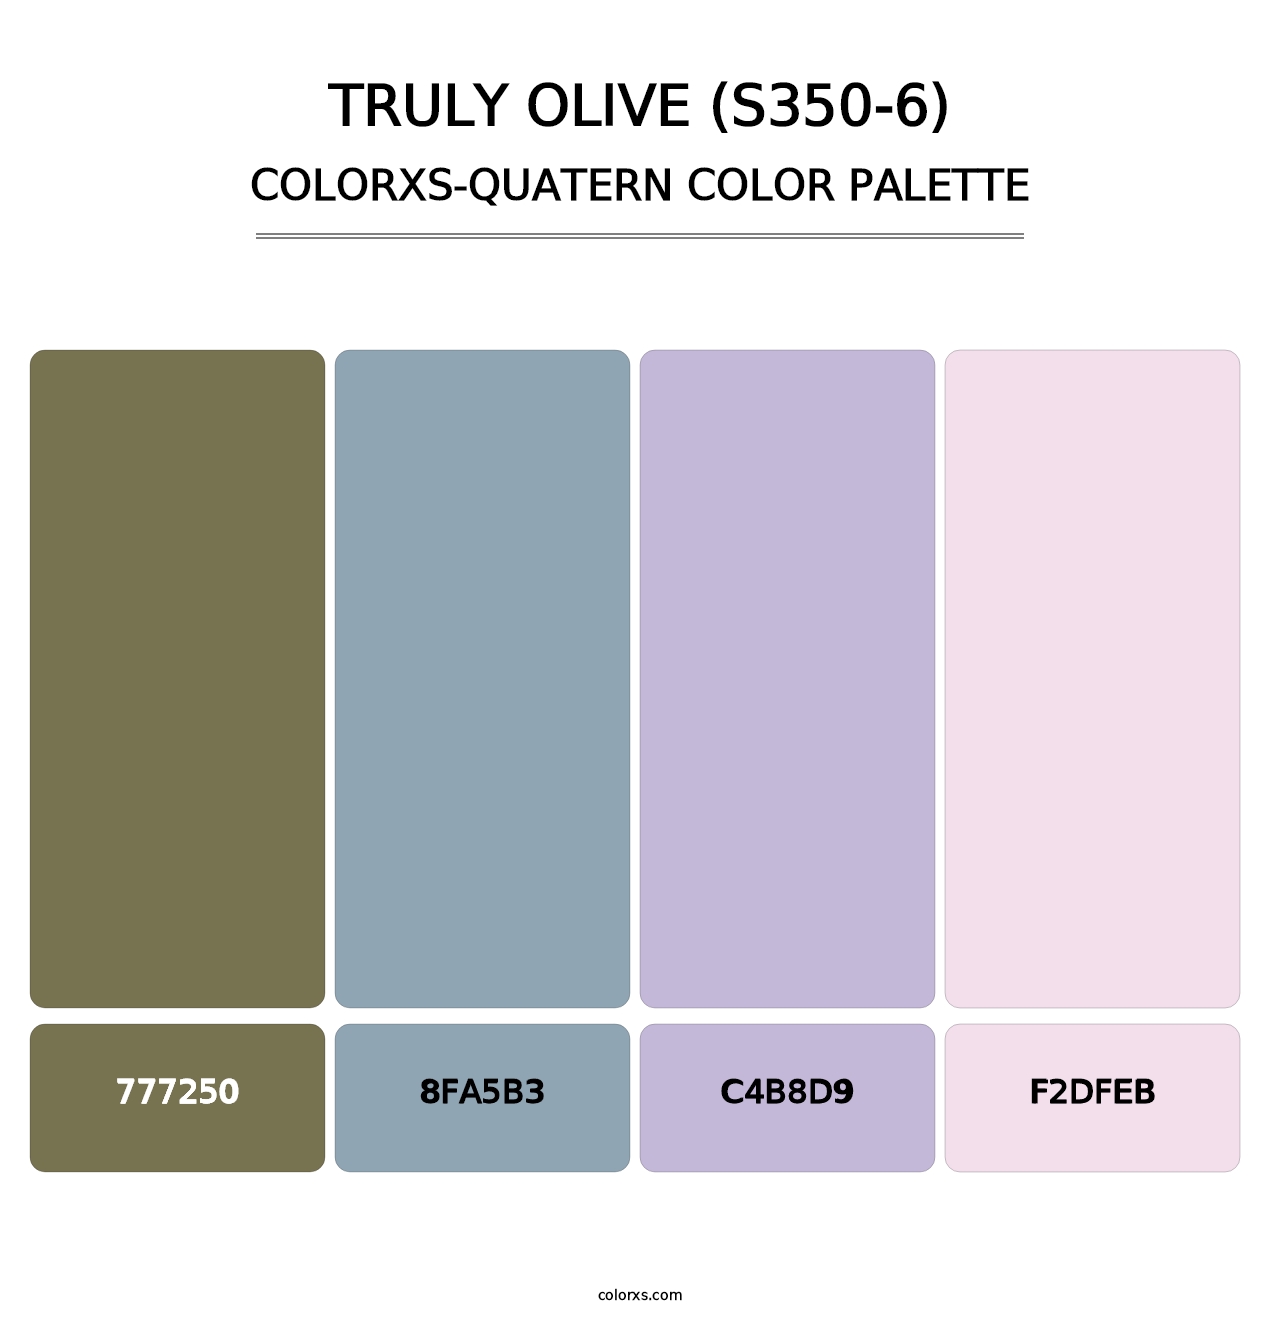 Truly Olive (S350-6) - Colorxs Quatern Palette